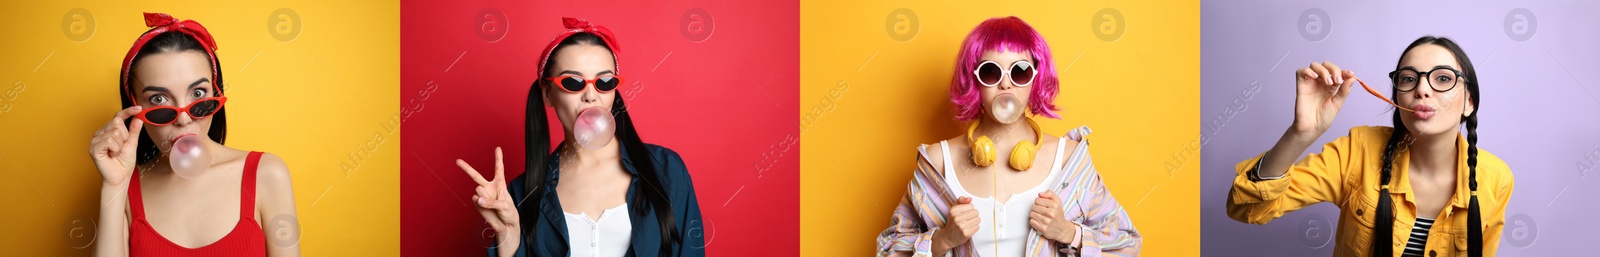 Image of Collage with photos of women with bubblegum on color backgrounds, banner design